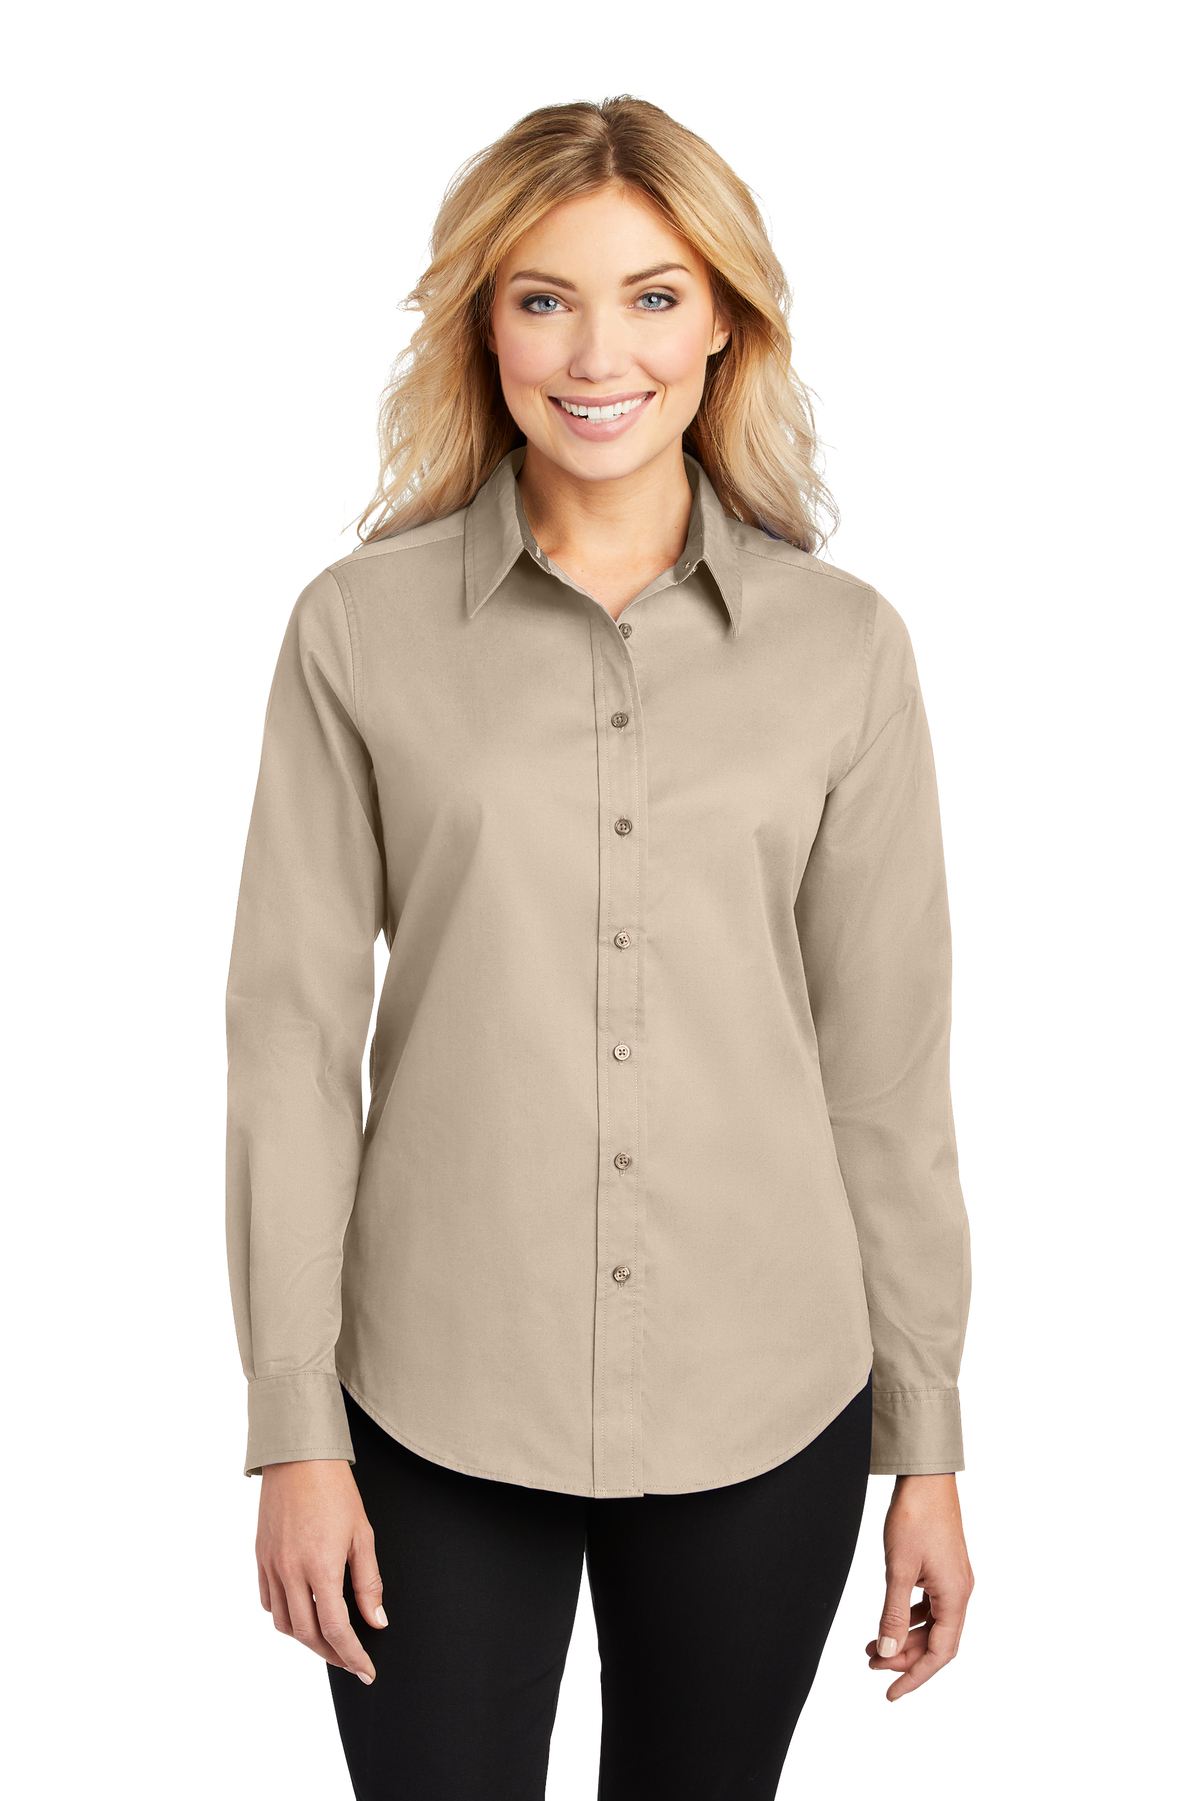 Port Authority Ladies Long Sleeve Easy Care Shirt | Product | Port